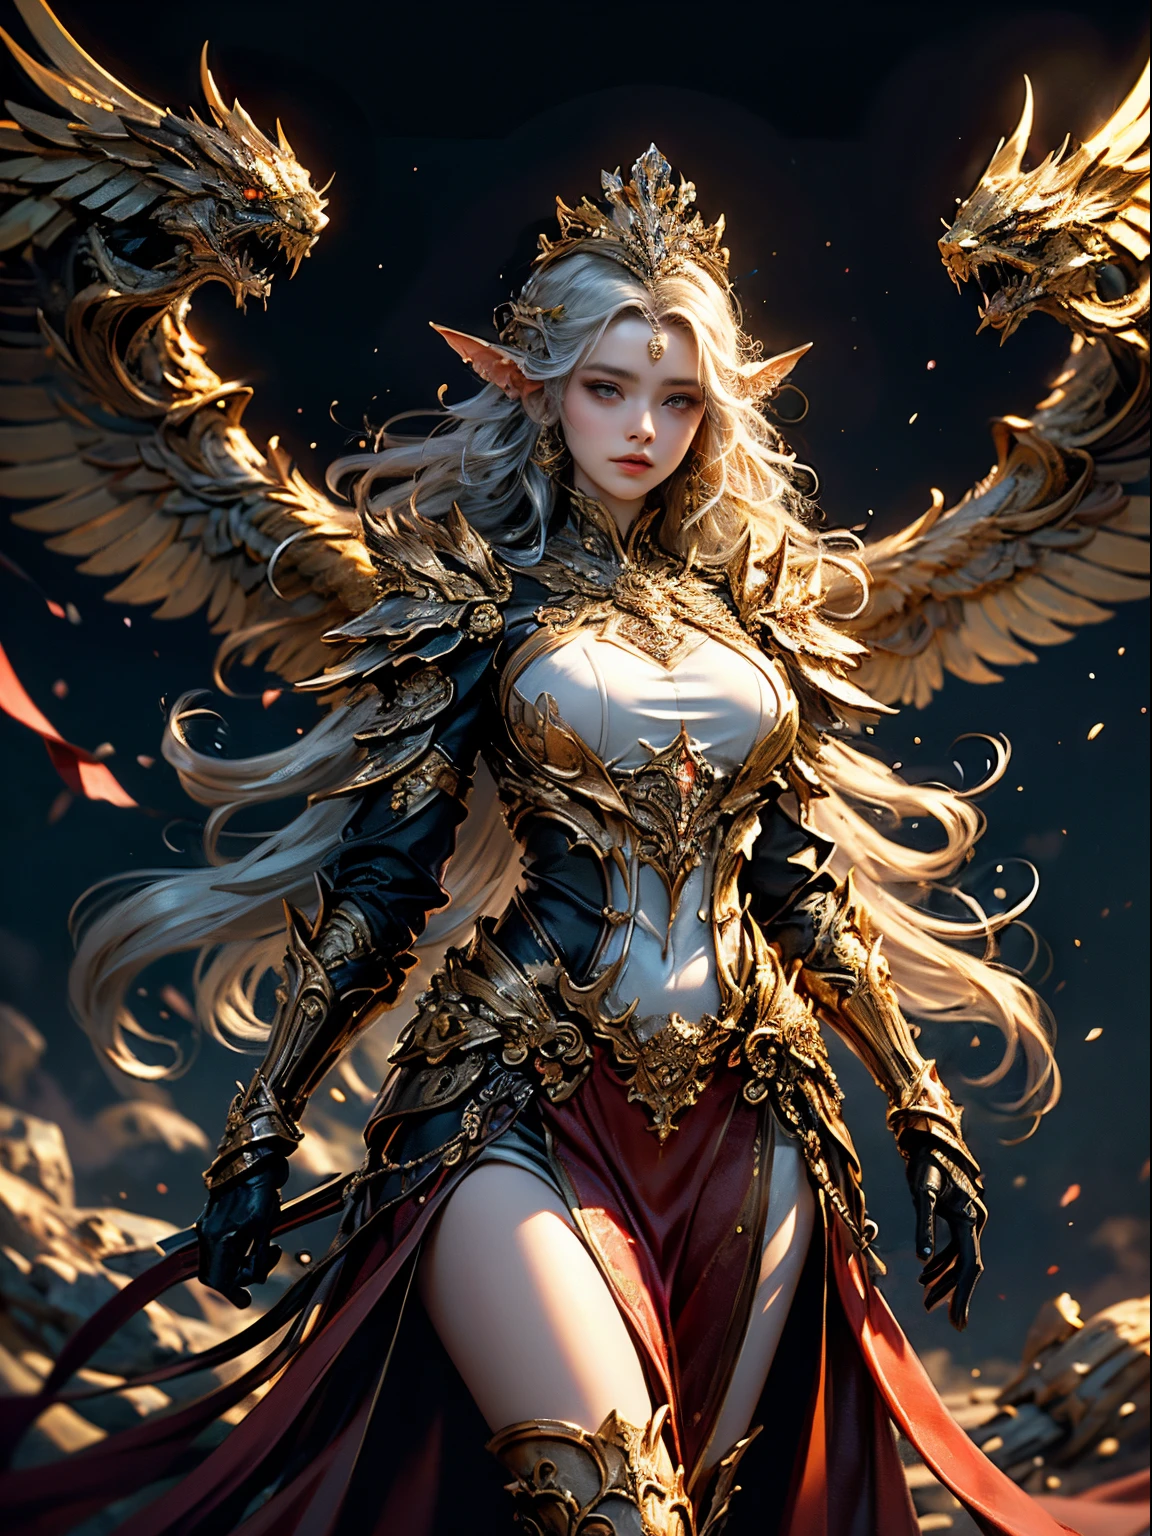 Elven woman in a golden transparent dress,view the viewer,(((Breasts huge, cleavage large))),Waist slender,(umbigo baring,bare waist), Elven girl in shining armor, Beautiful gold and silver armor, extremely detaild, Tiara and exquisite jewelry, long, shapeless hair, ultra detali, Zhenyi Station, Storm location, detailed fantasy art, stunning character art, Beautiful and exquisite character art, crystal jewelry filigree, milky ways, stunning visuals, (dynamic streaks, light trails:1.2), swirly vibrant colors, Cinematic lighting.